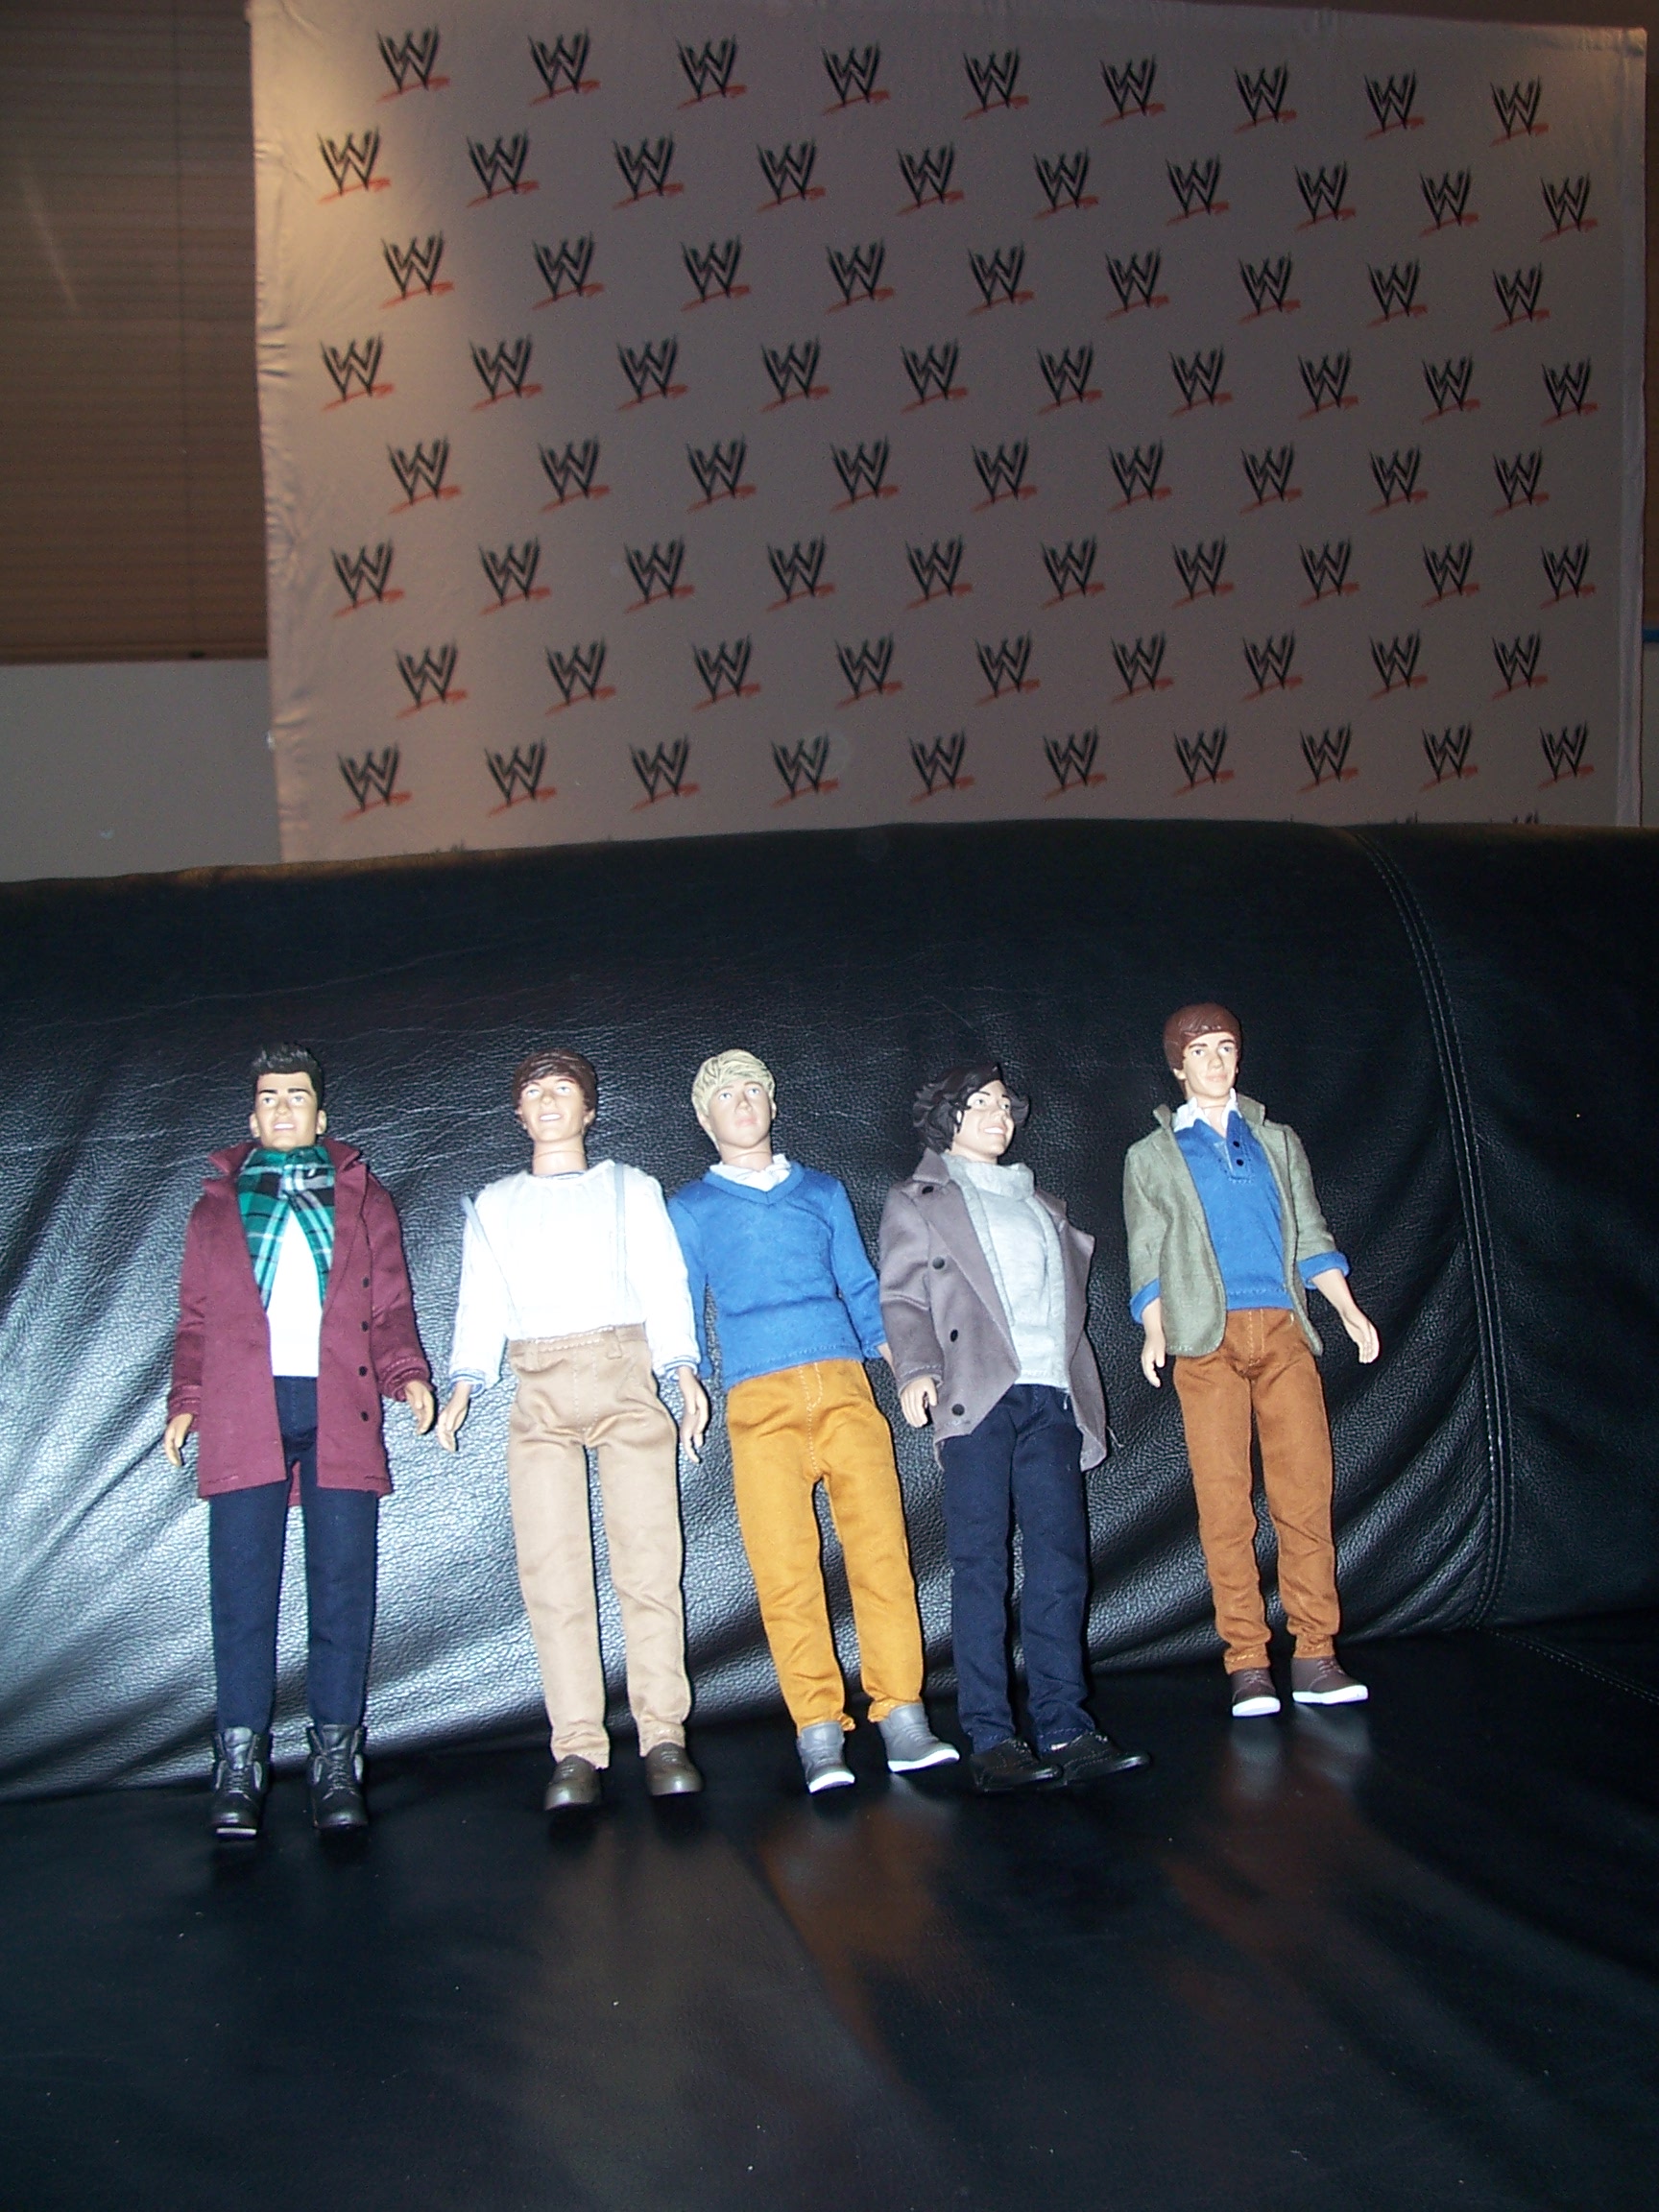 New One Direction Dolls at Kidzcoolit HQ!